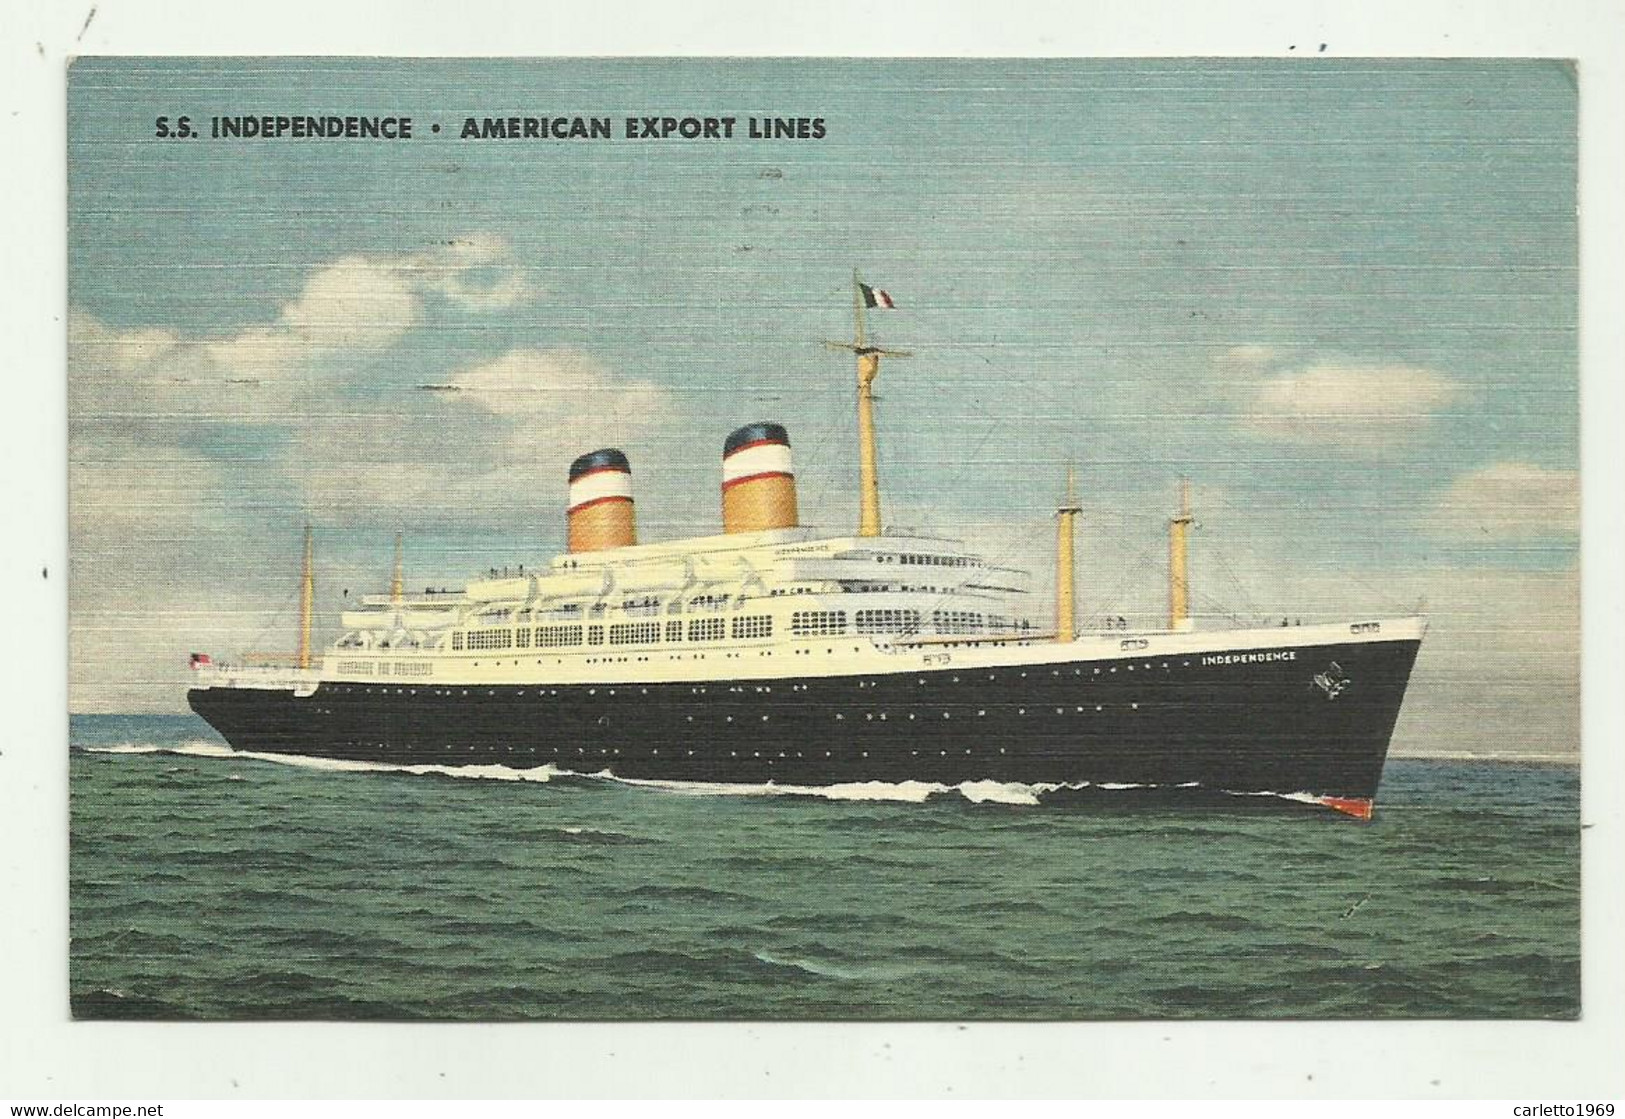 S.S. INDEPENDENCE - AMERICAN EXPORT LINES  - VIAGGIATA FP - Steamers